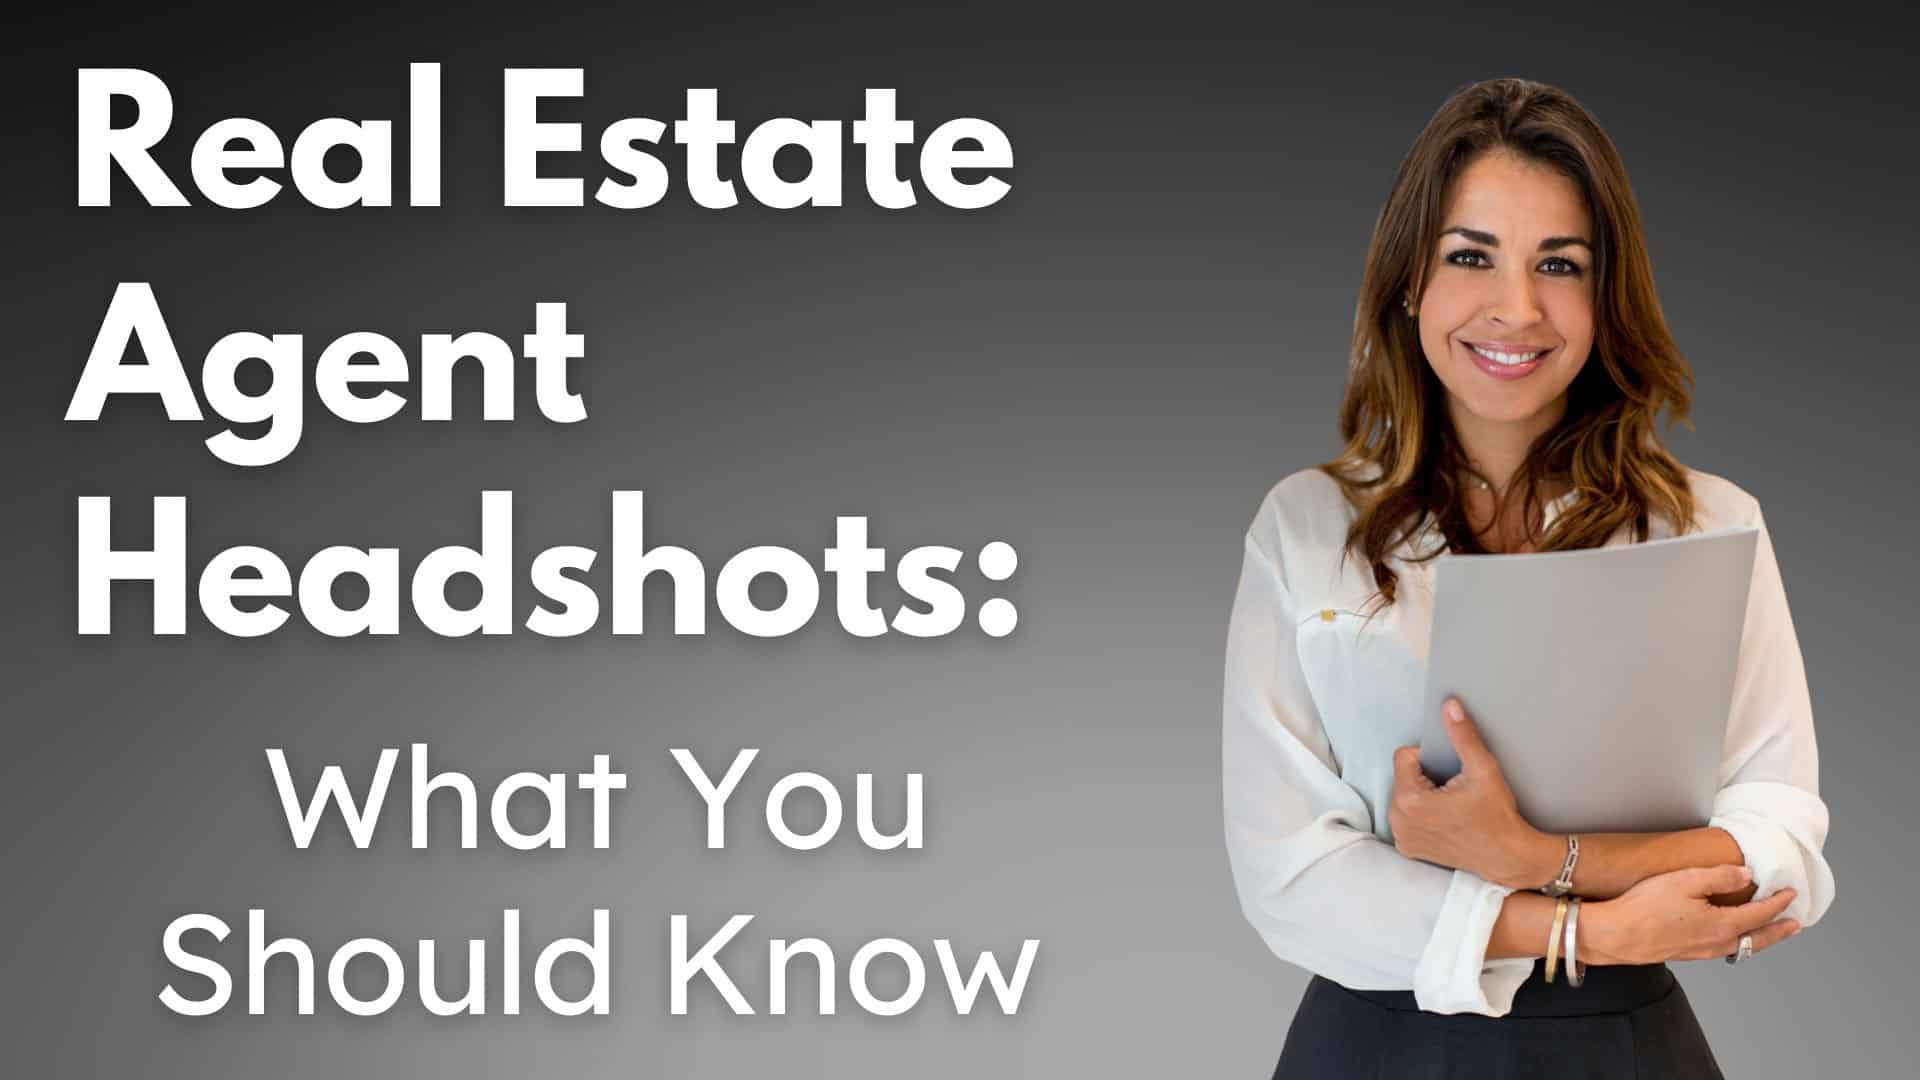 Real Estate Agent Headshots: What YOU Should Know